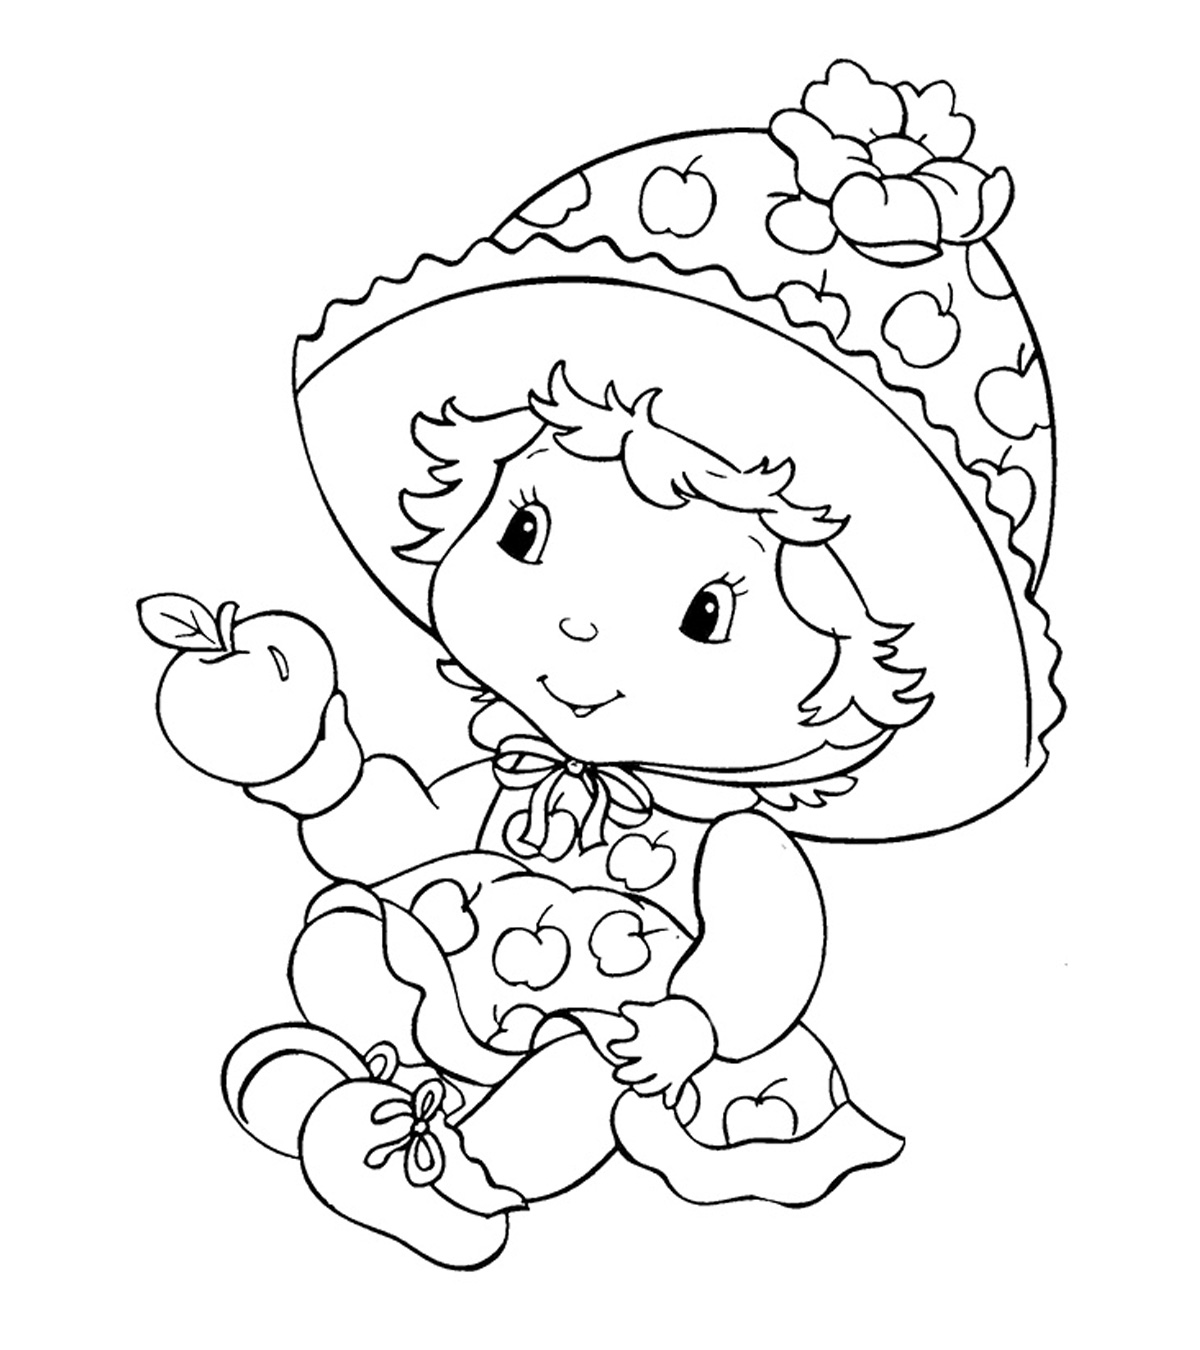 Snacks Coloring Pages - MomJunction